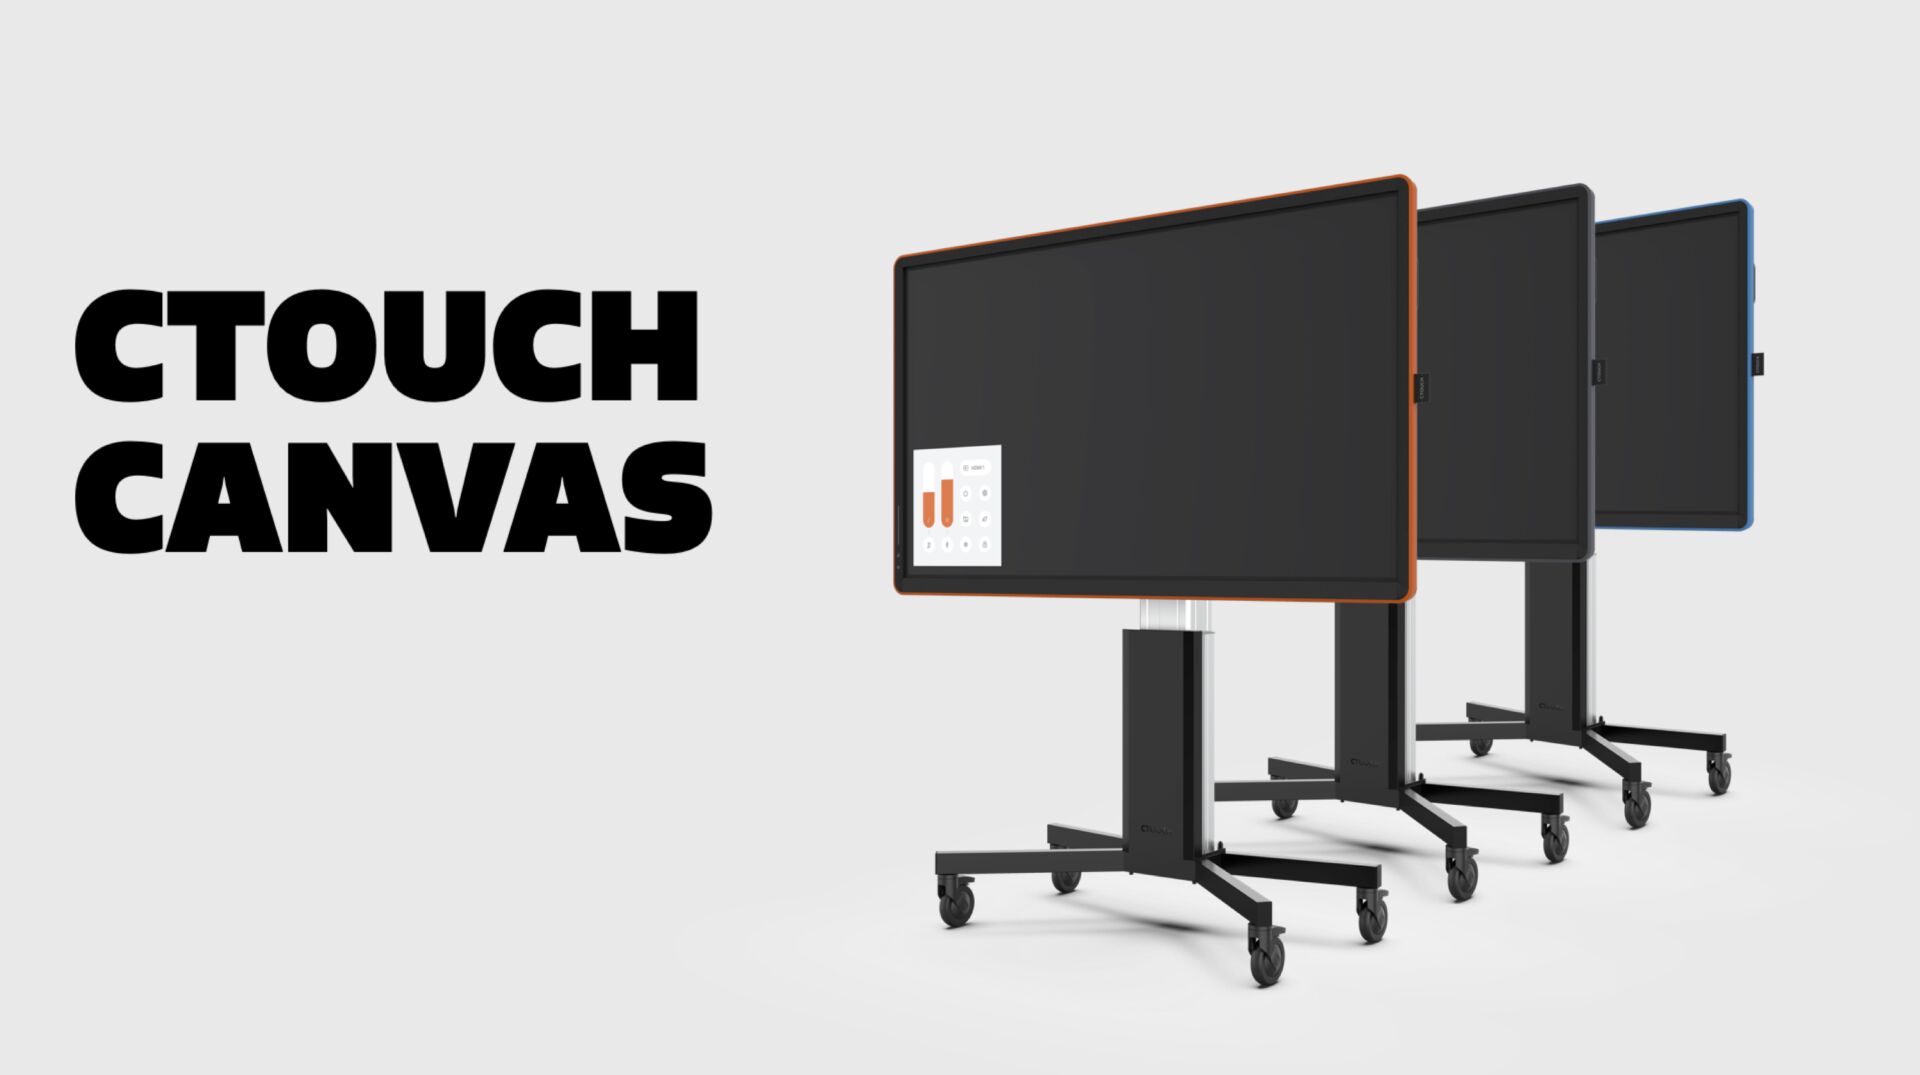 CTOUCH CANVAS 3 in row